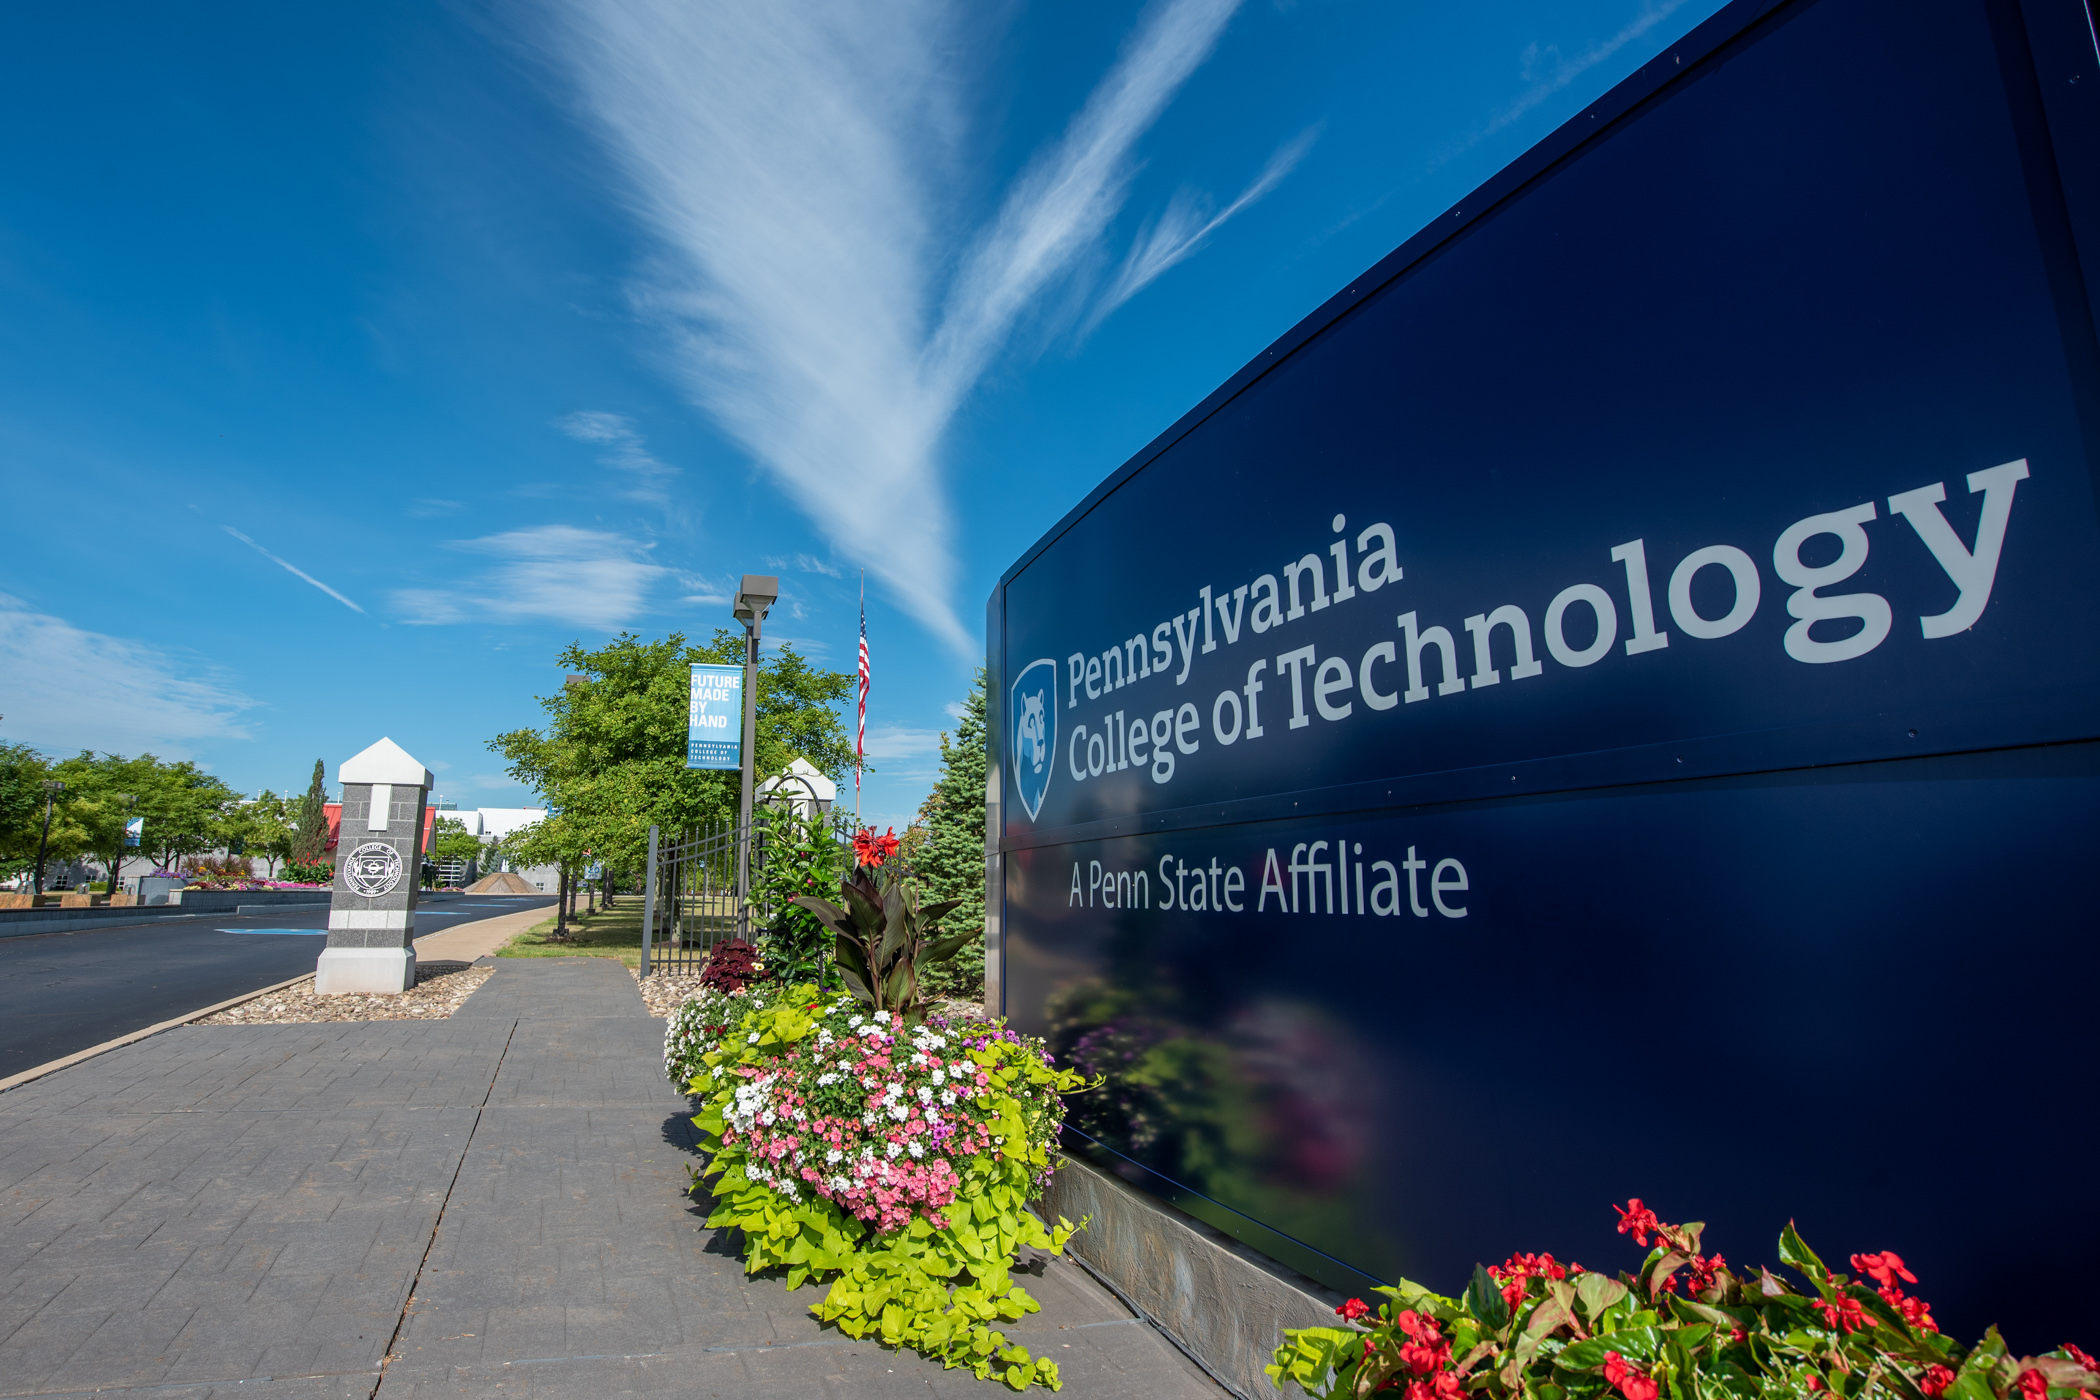 The entrance to Pennsylvania College of Technology.